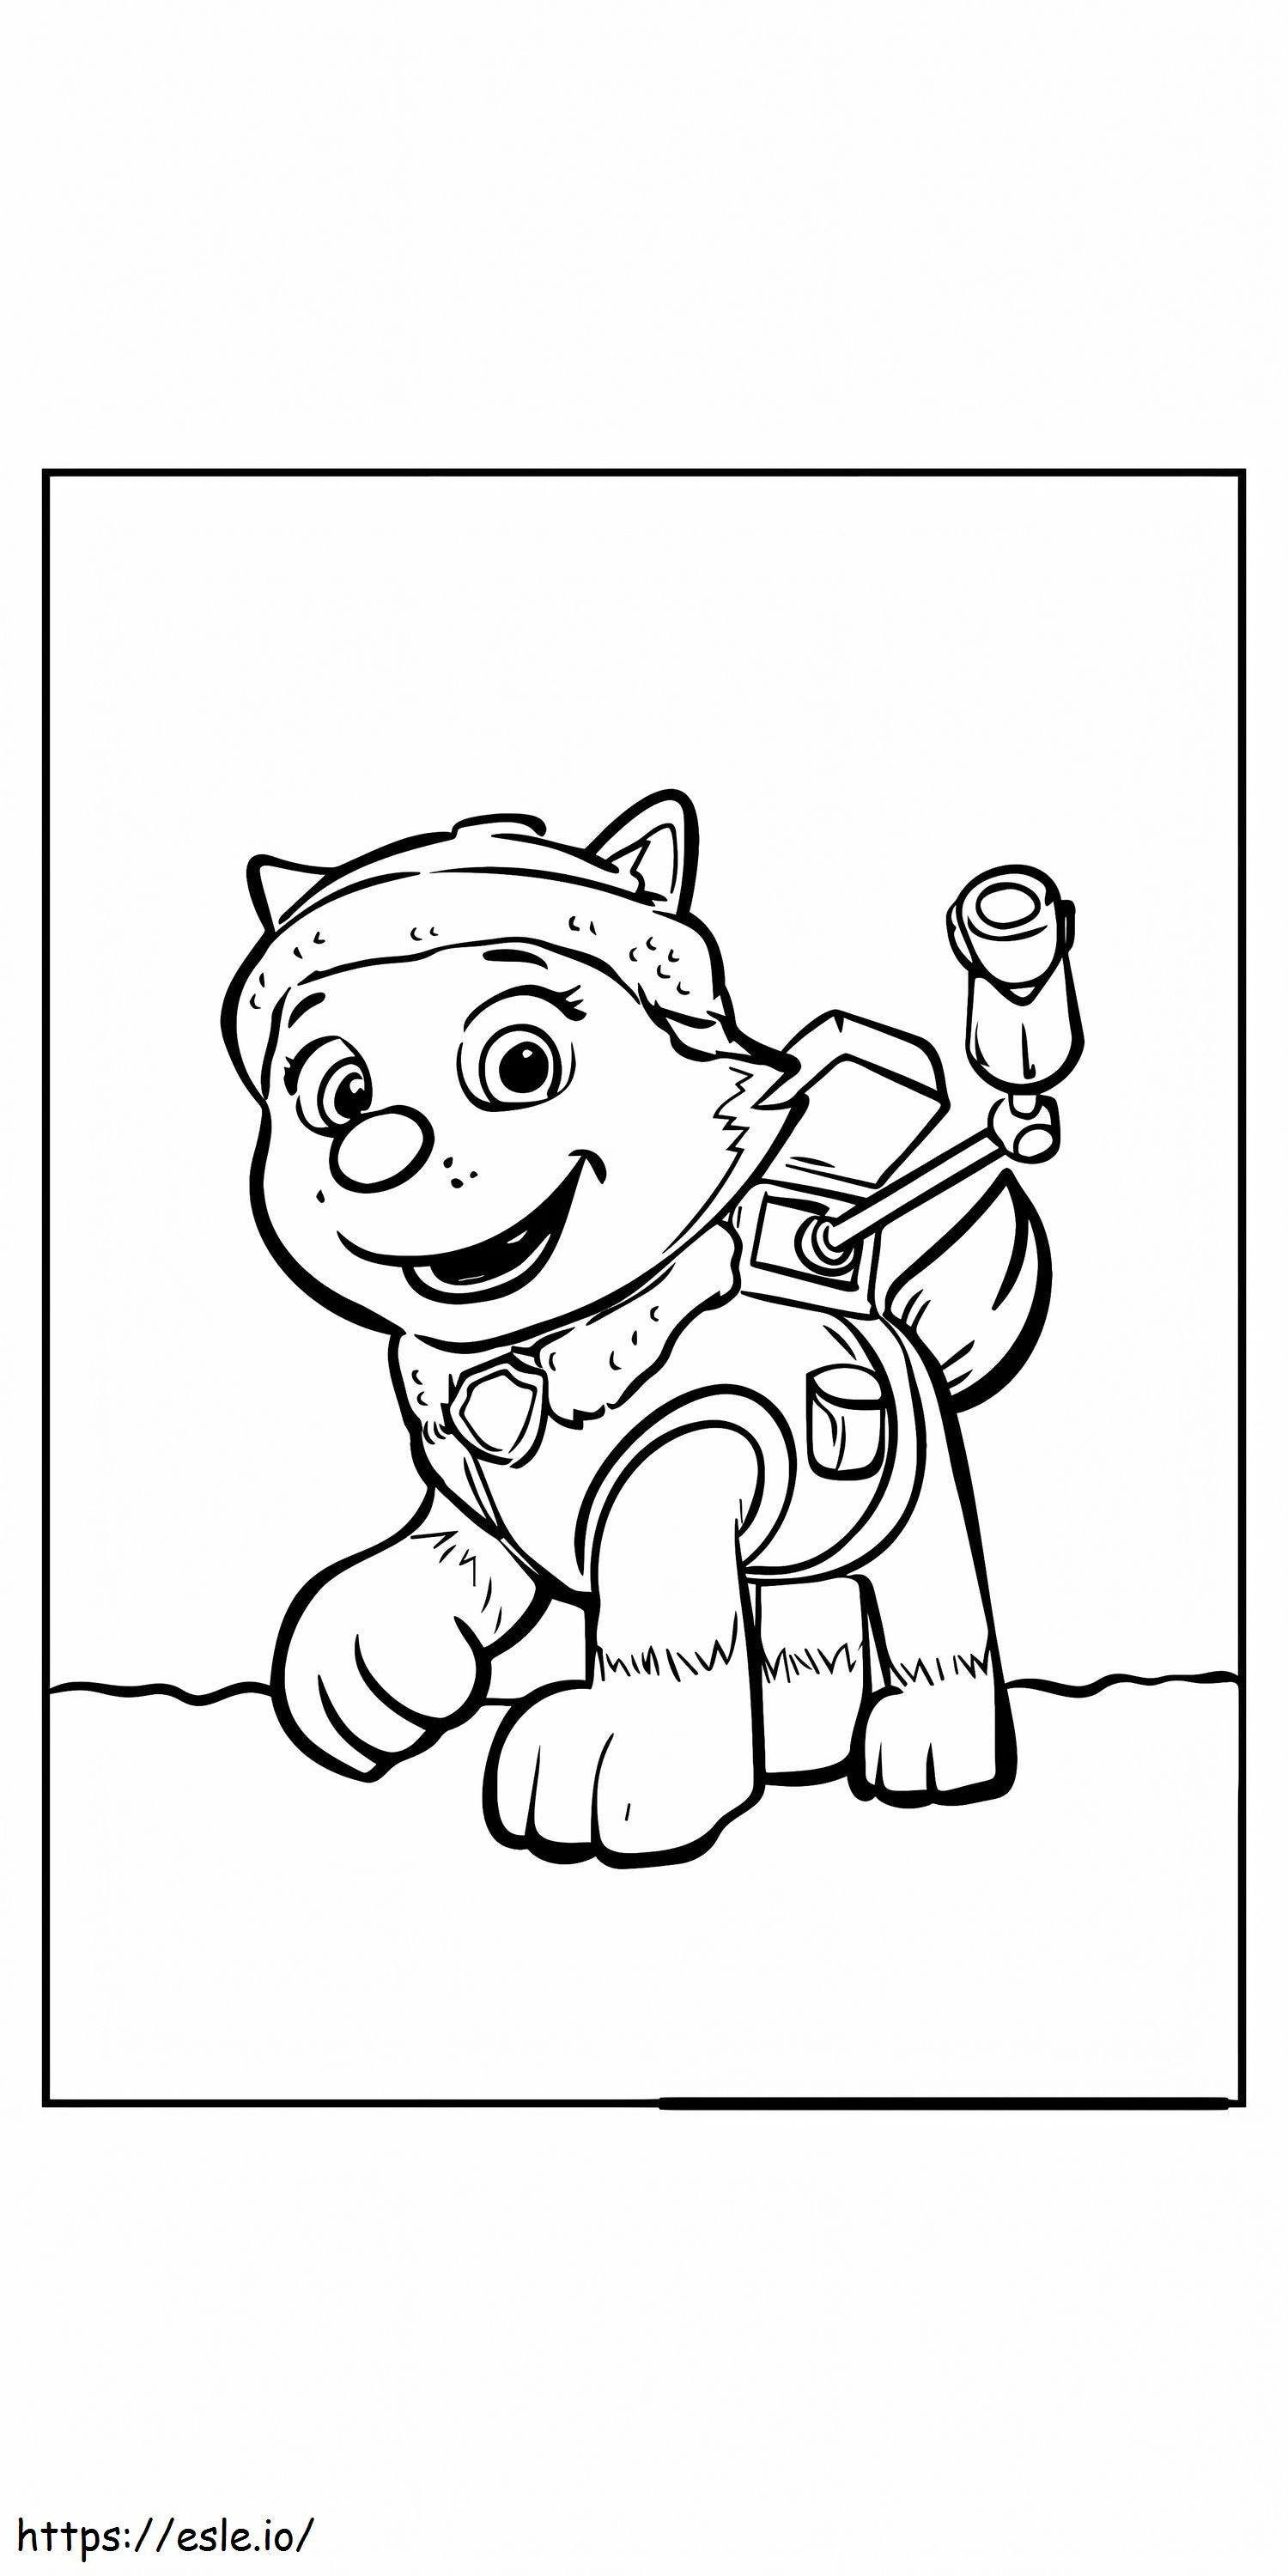 Everest Plays With Skye And Rubble coloring page